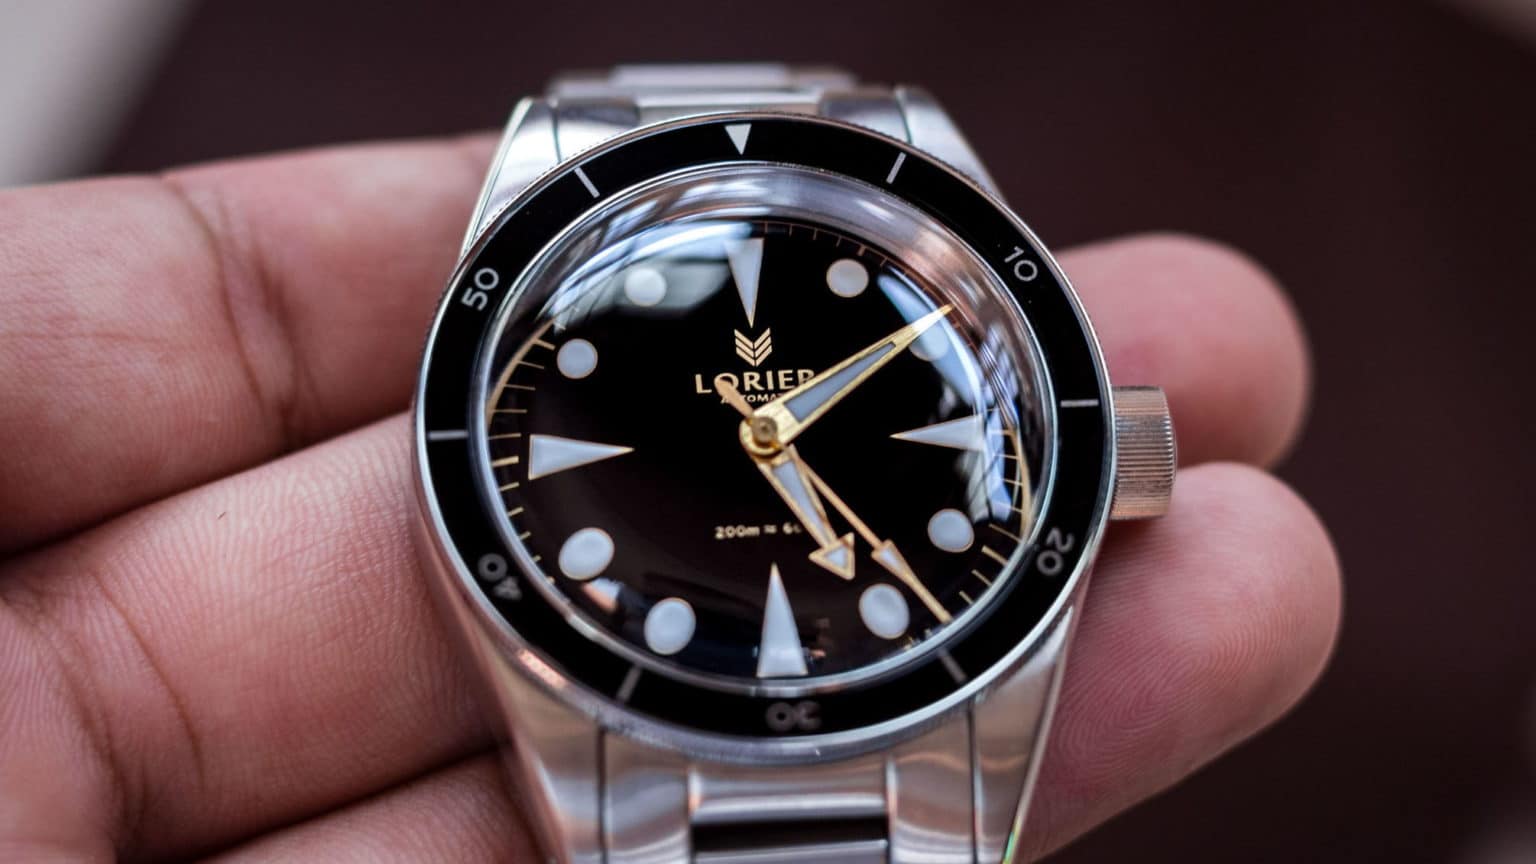 The Best Microbrand Watches for Men in 2022 • The Slender Wrist